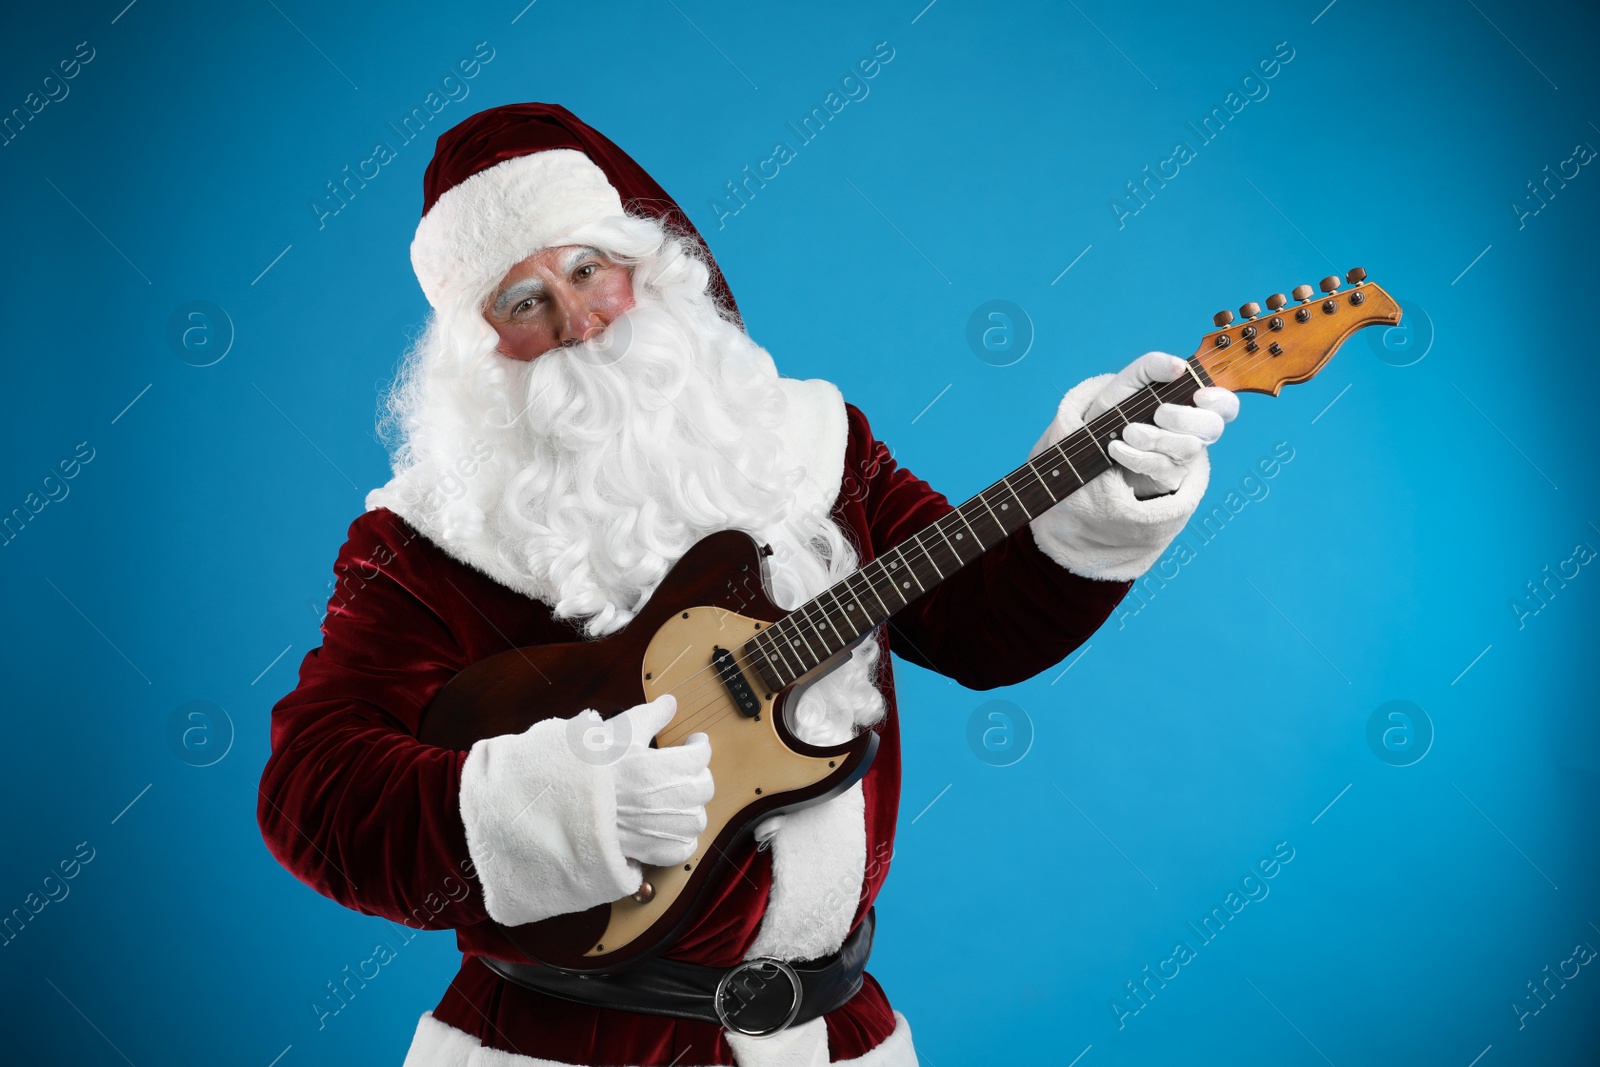 Photo of Santa Claus playing electric guitar on blue background. Christmas music